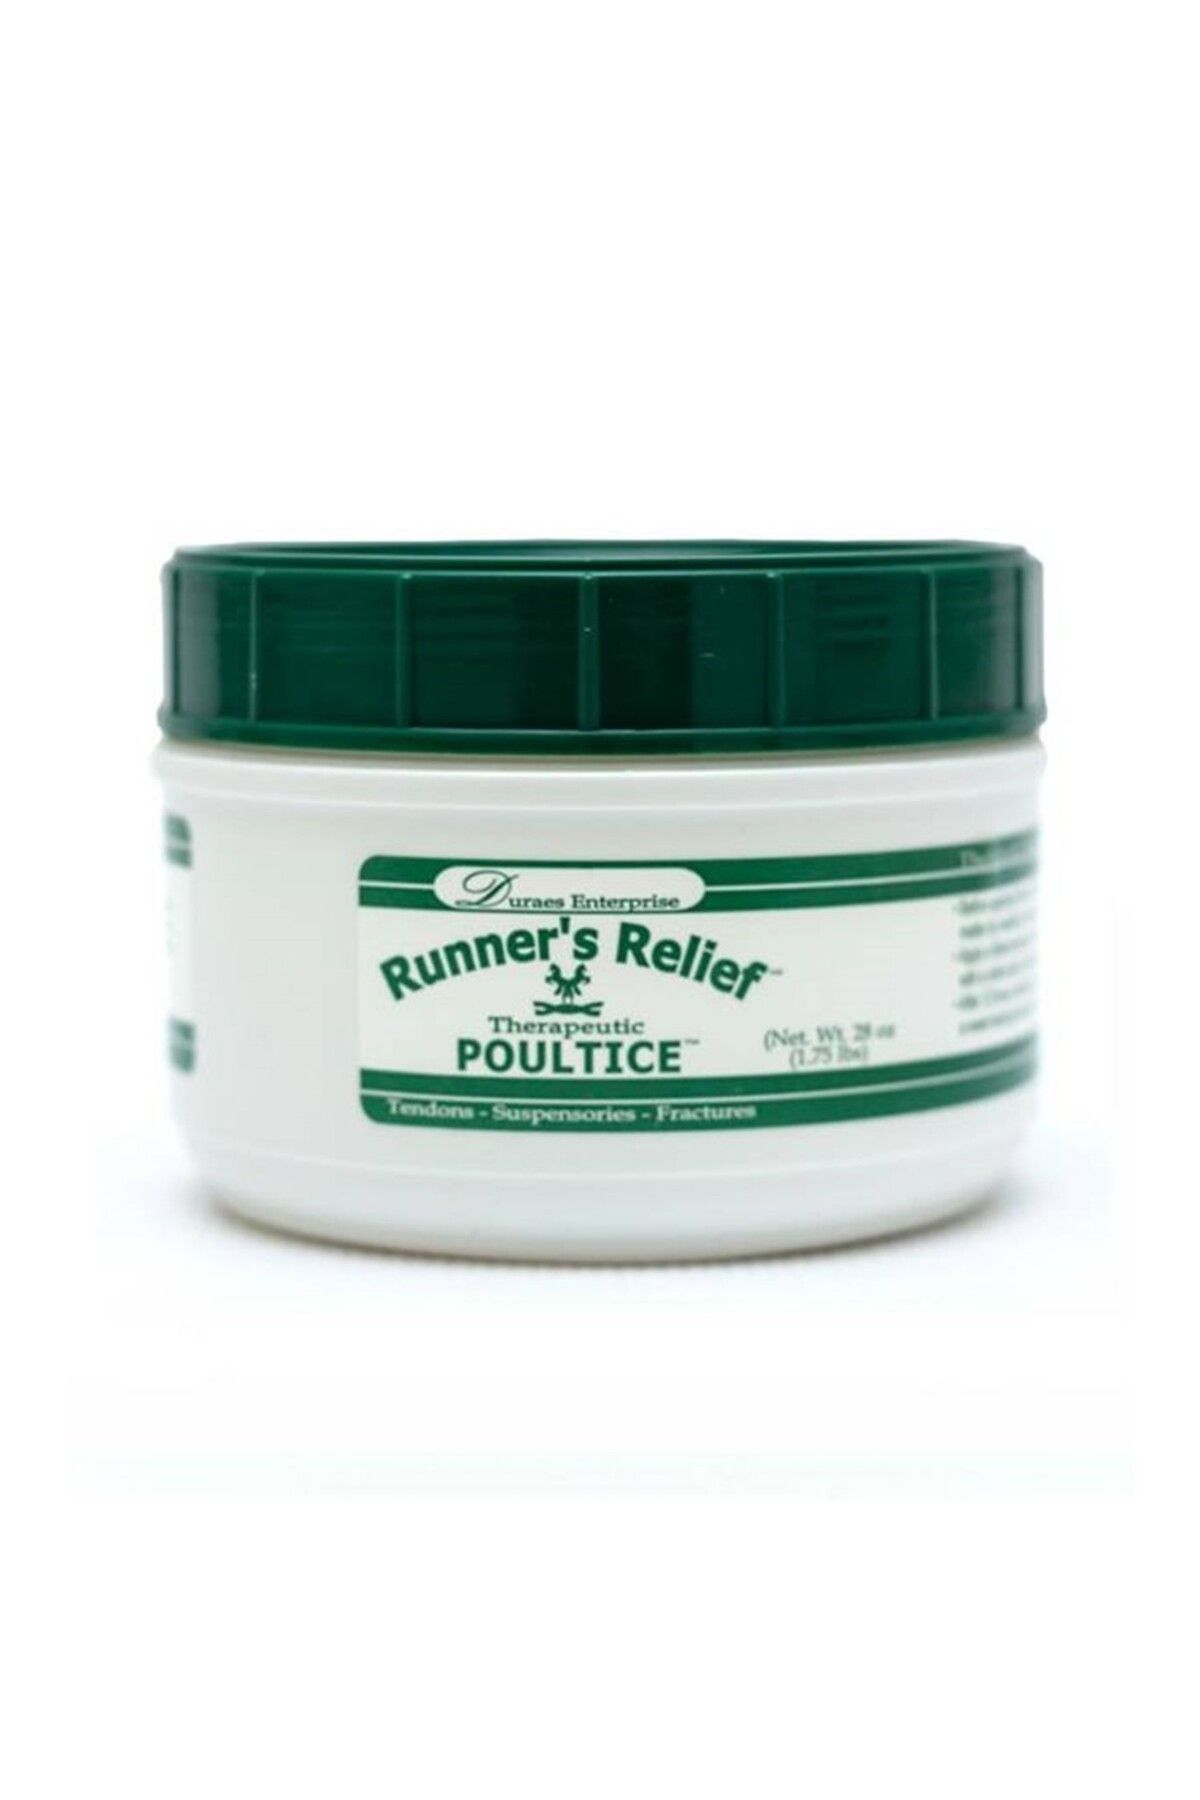 Derby Runners Relief Therapeutic Poultice